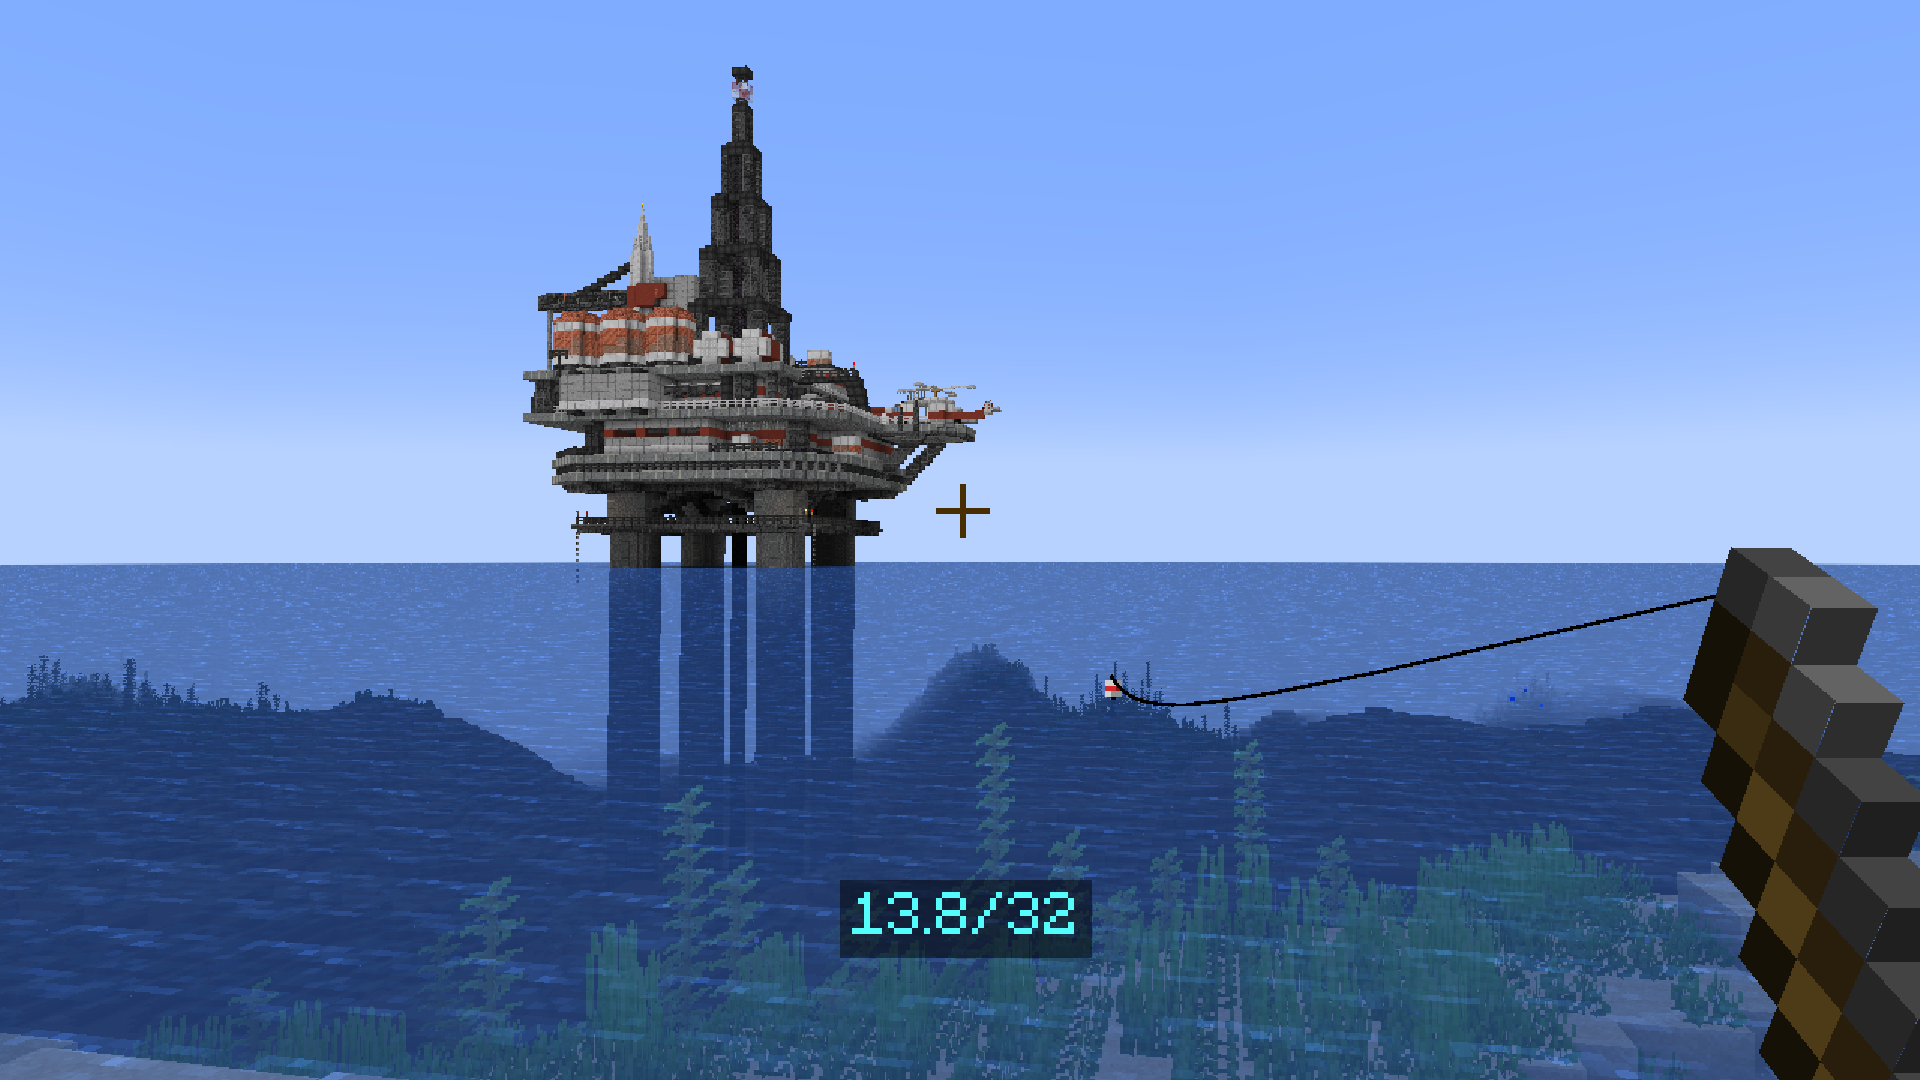 Fishing in a large body of water near an oil rig